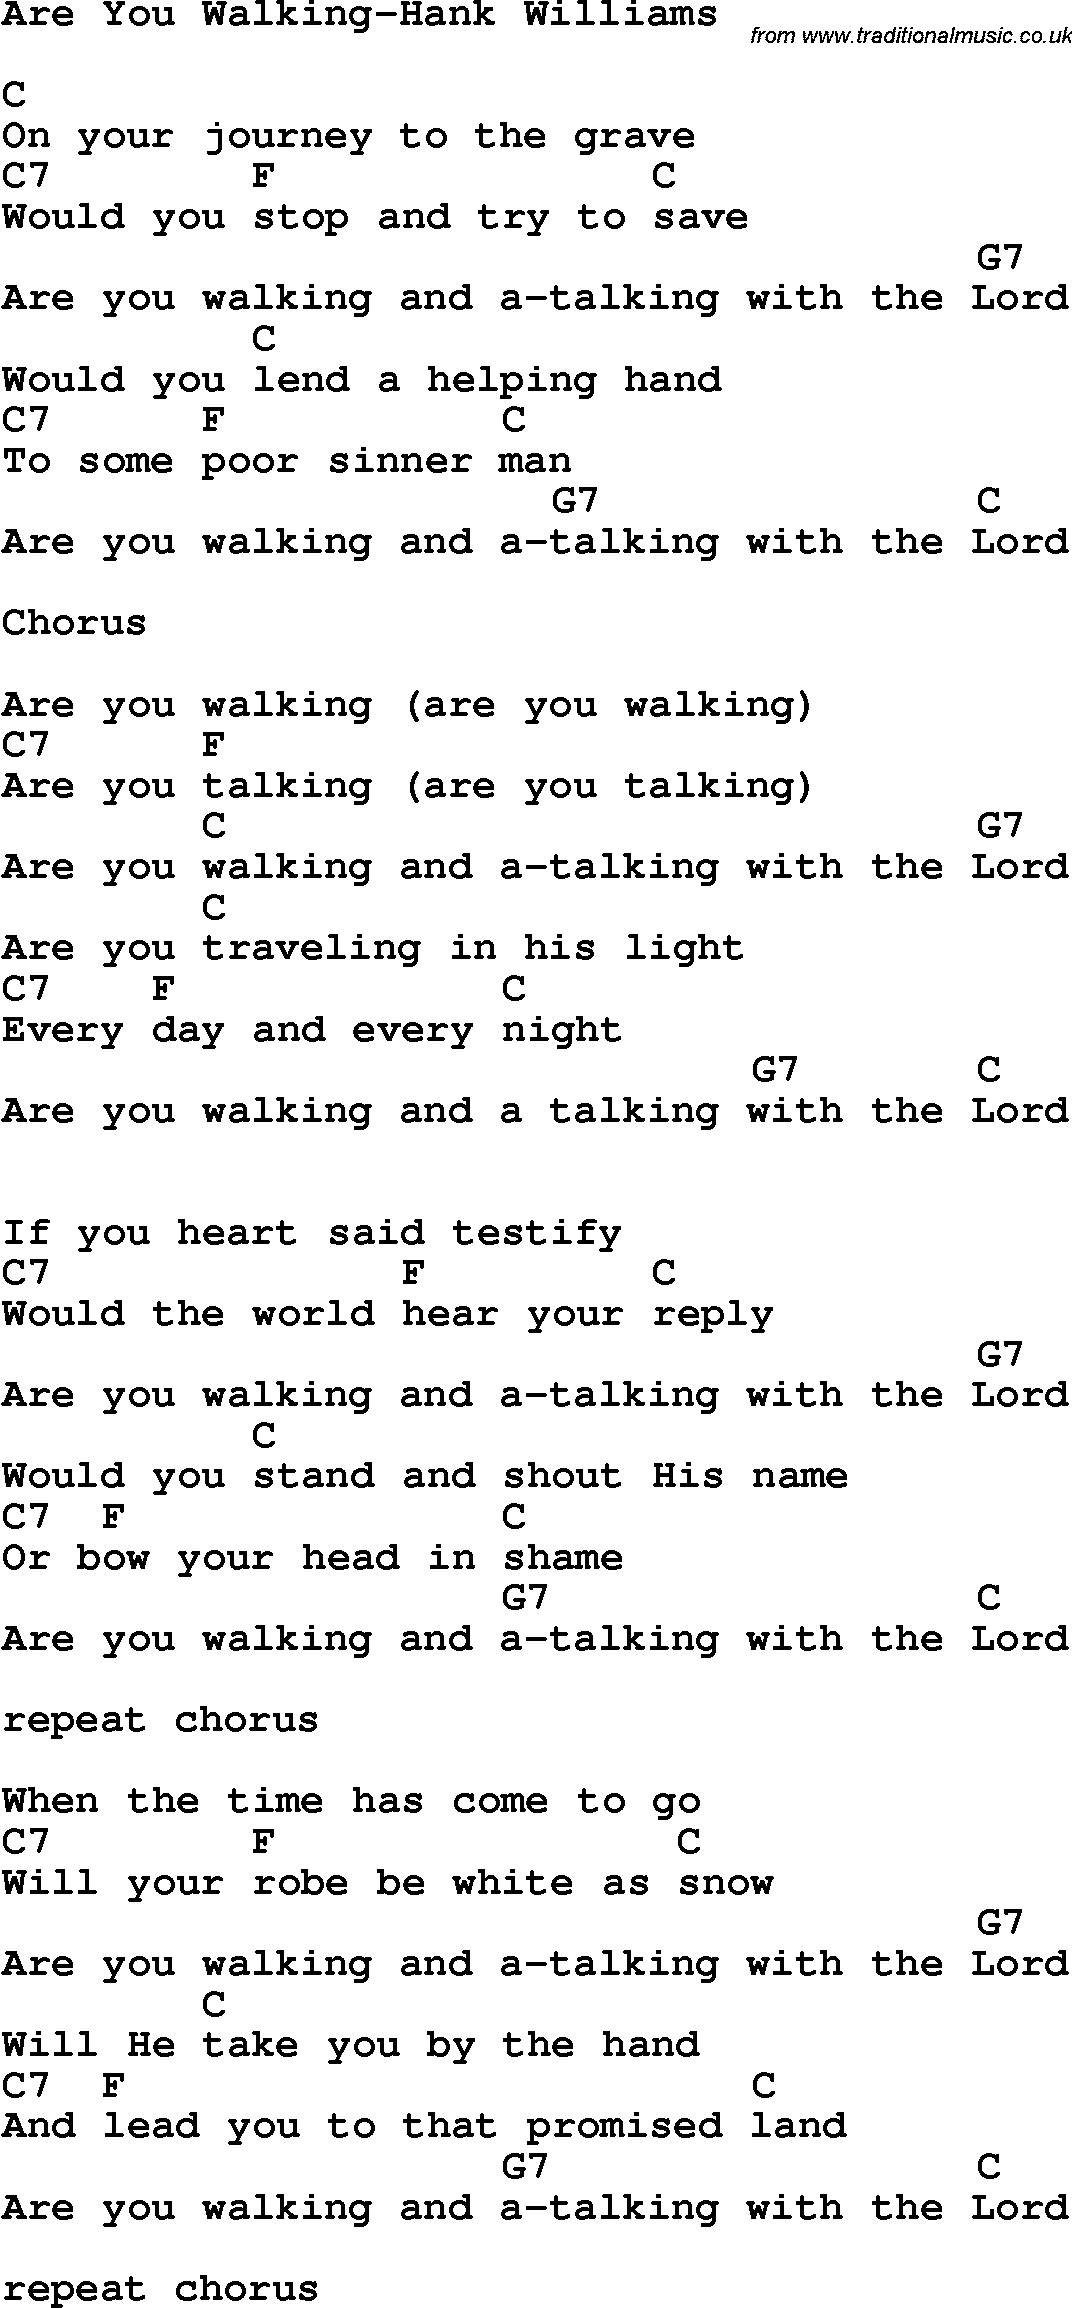 Country, Southern and Bluegrass Gospel Song Are You Walking-Hank Williams lyrics and chords